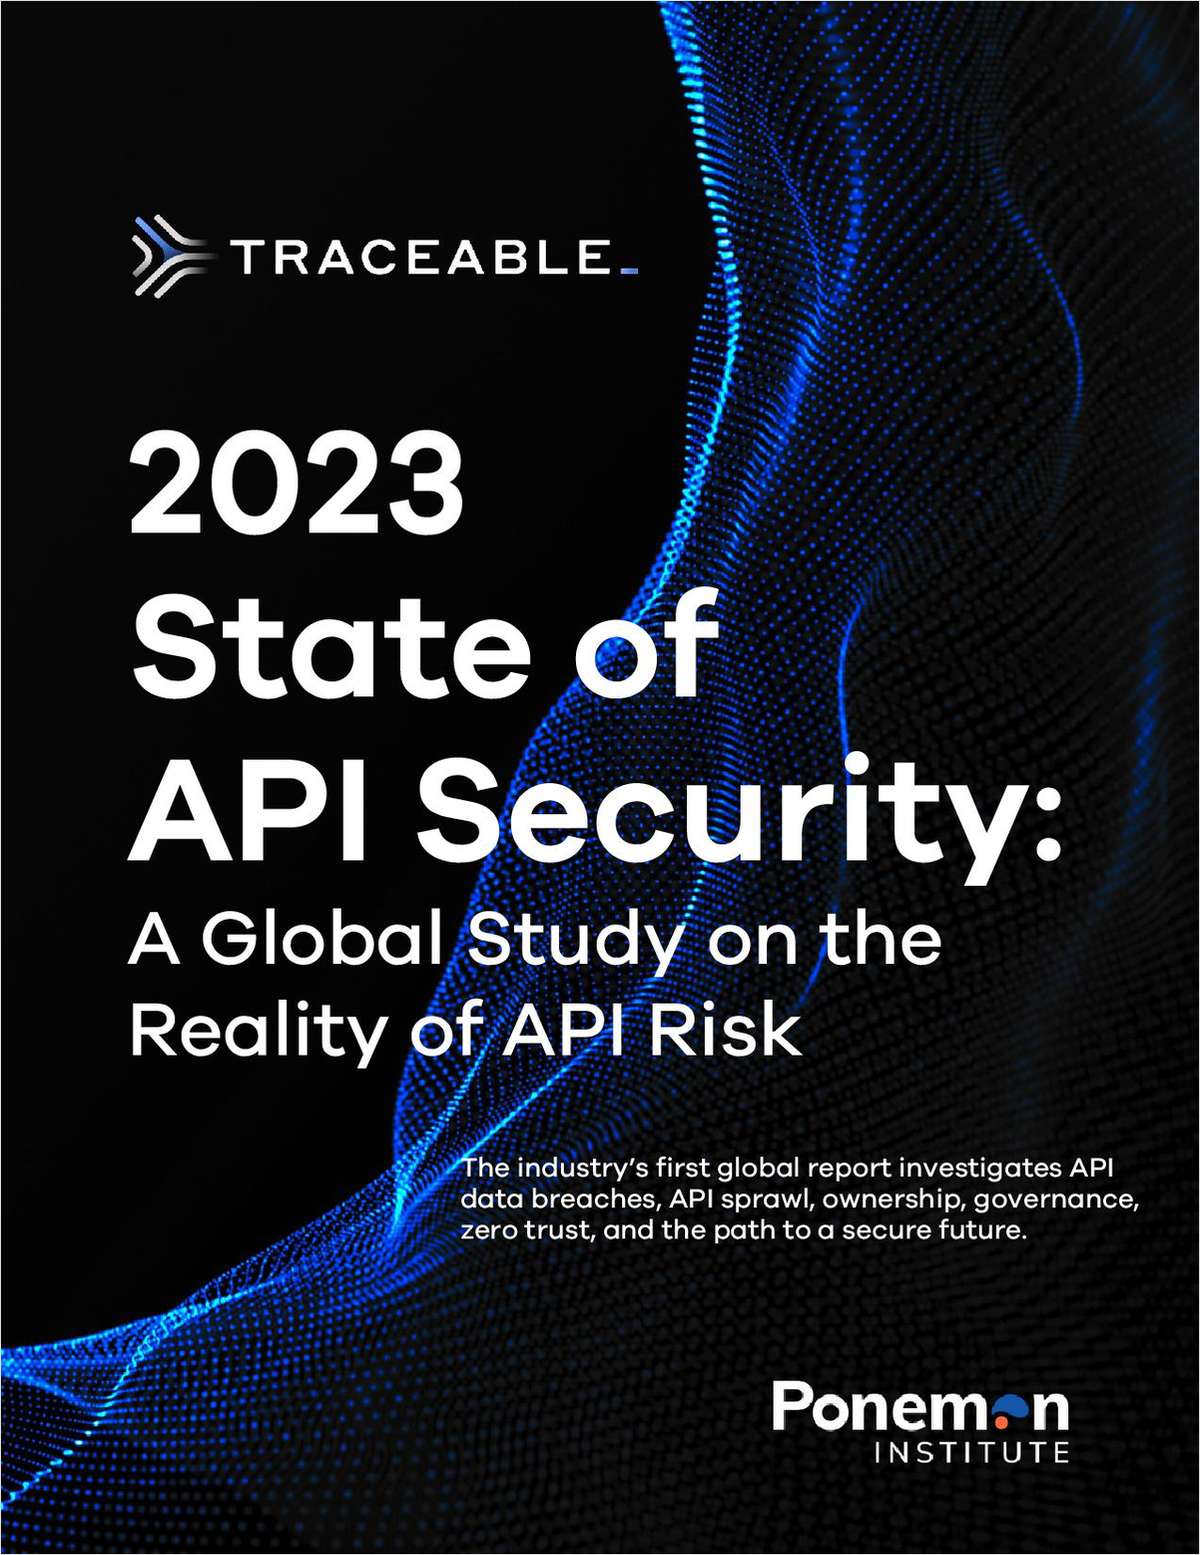 2023 State of API Security Report: Global Findings